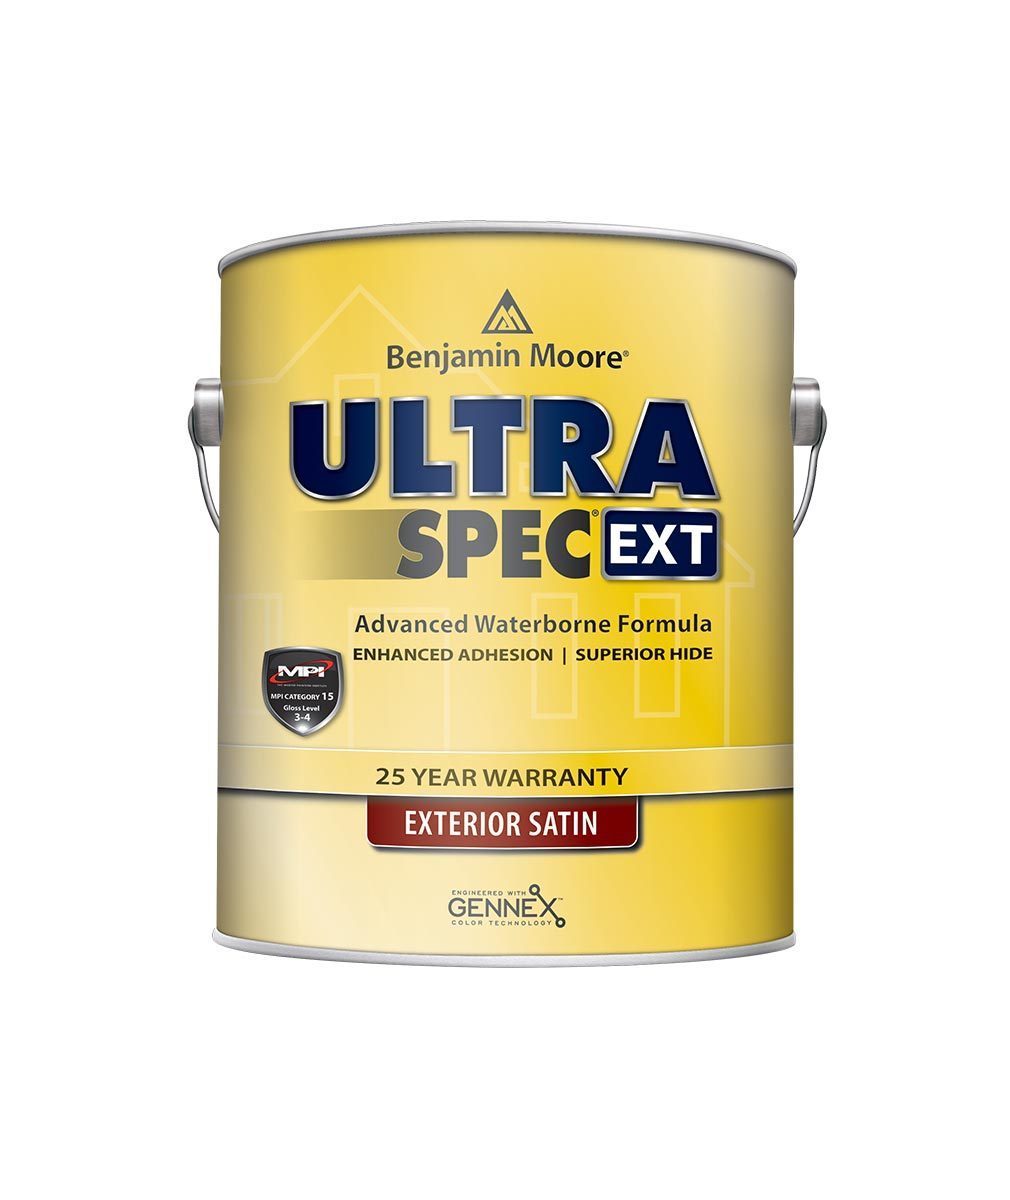 Benjamin Moore Ultra Spec EXT exterior paint in satin finish available at Catalina Paints